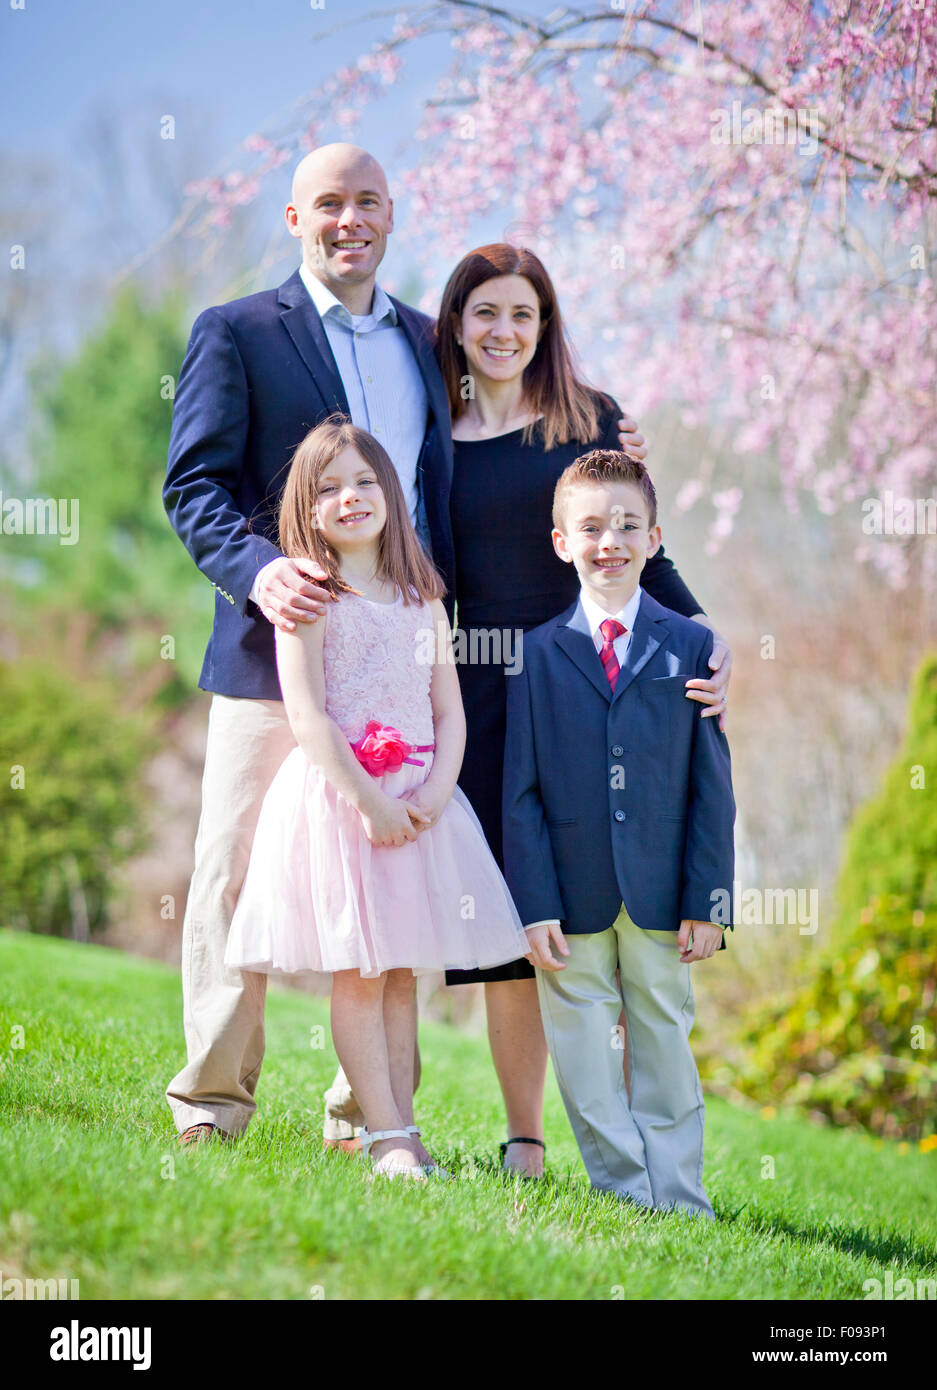 Family portrait during spring with selective focus on children Stock Photo